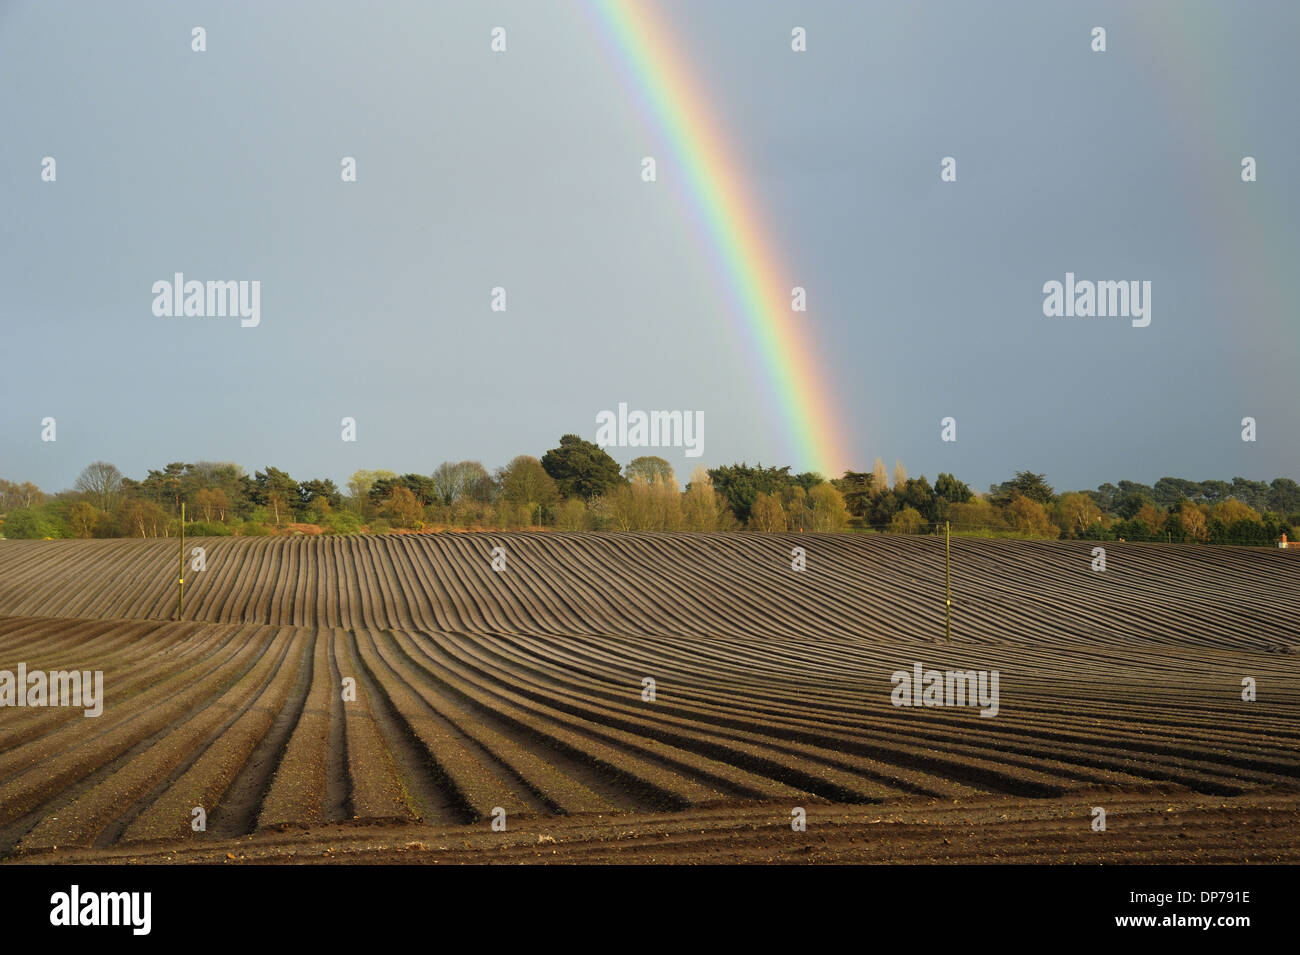 Rainbow over trees and arable field with furrows, in evening sunlight, Aldeburgh, Suffolk, England, April Stock Photo